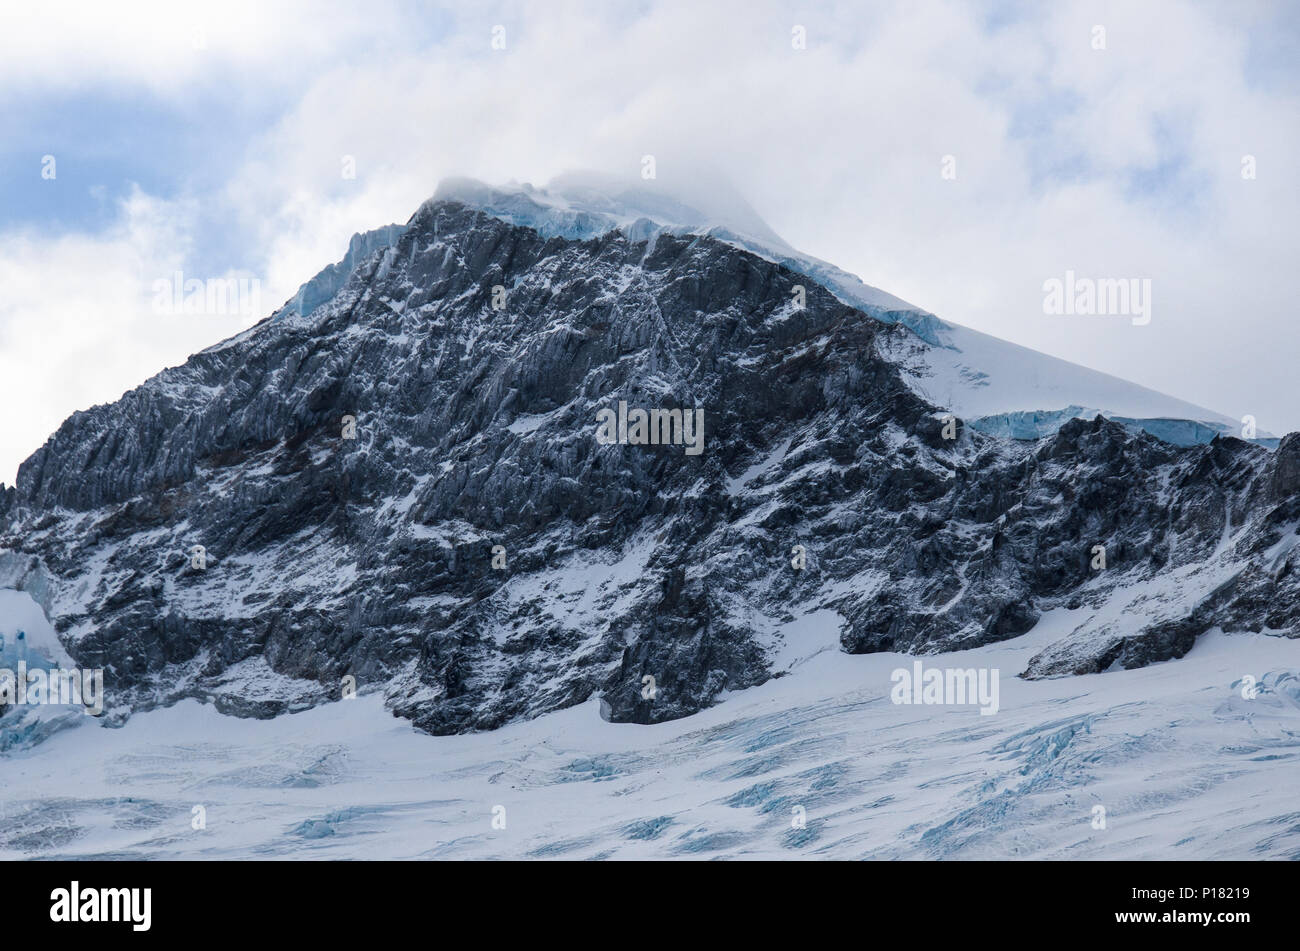 Snowy mountain peak, closeup. Roughed snow topped summit peak with rocky cliff face. Andes mountains, Chile. Stock Photo